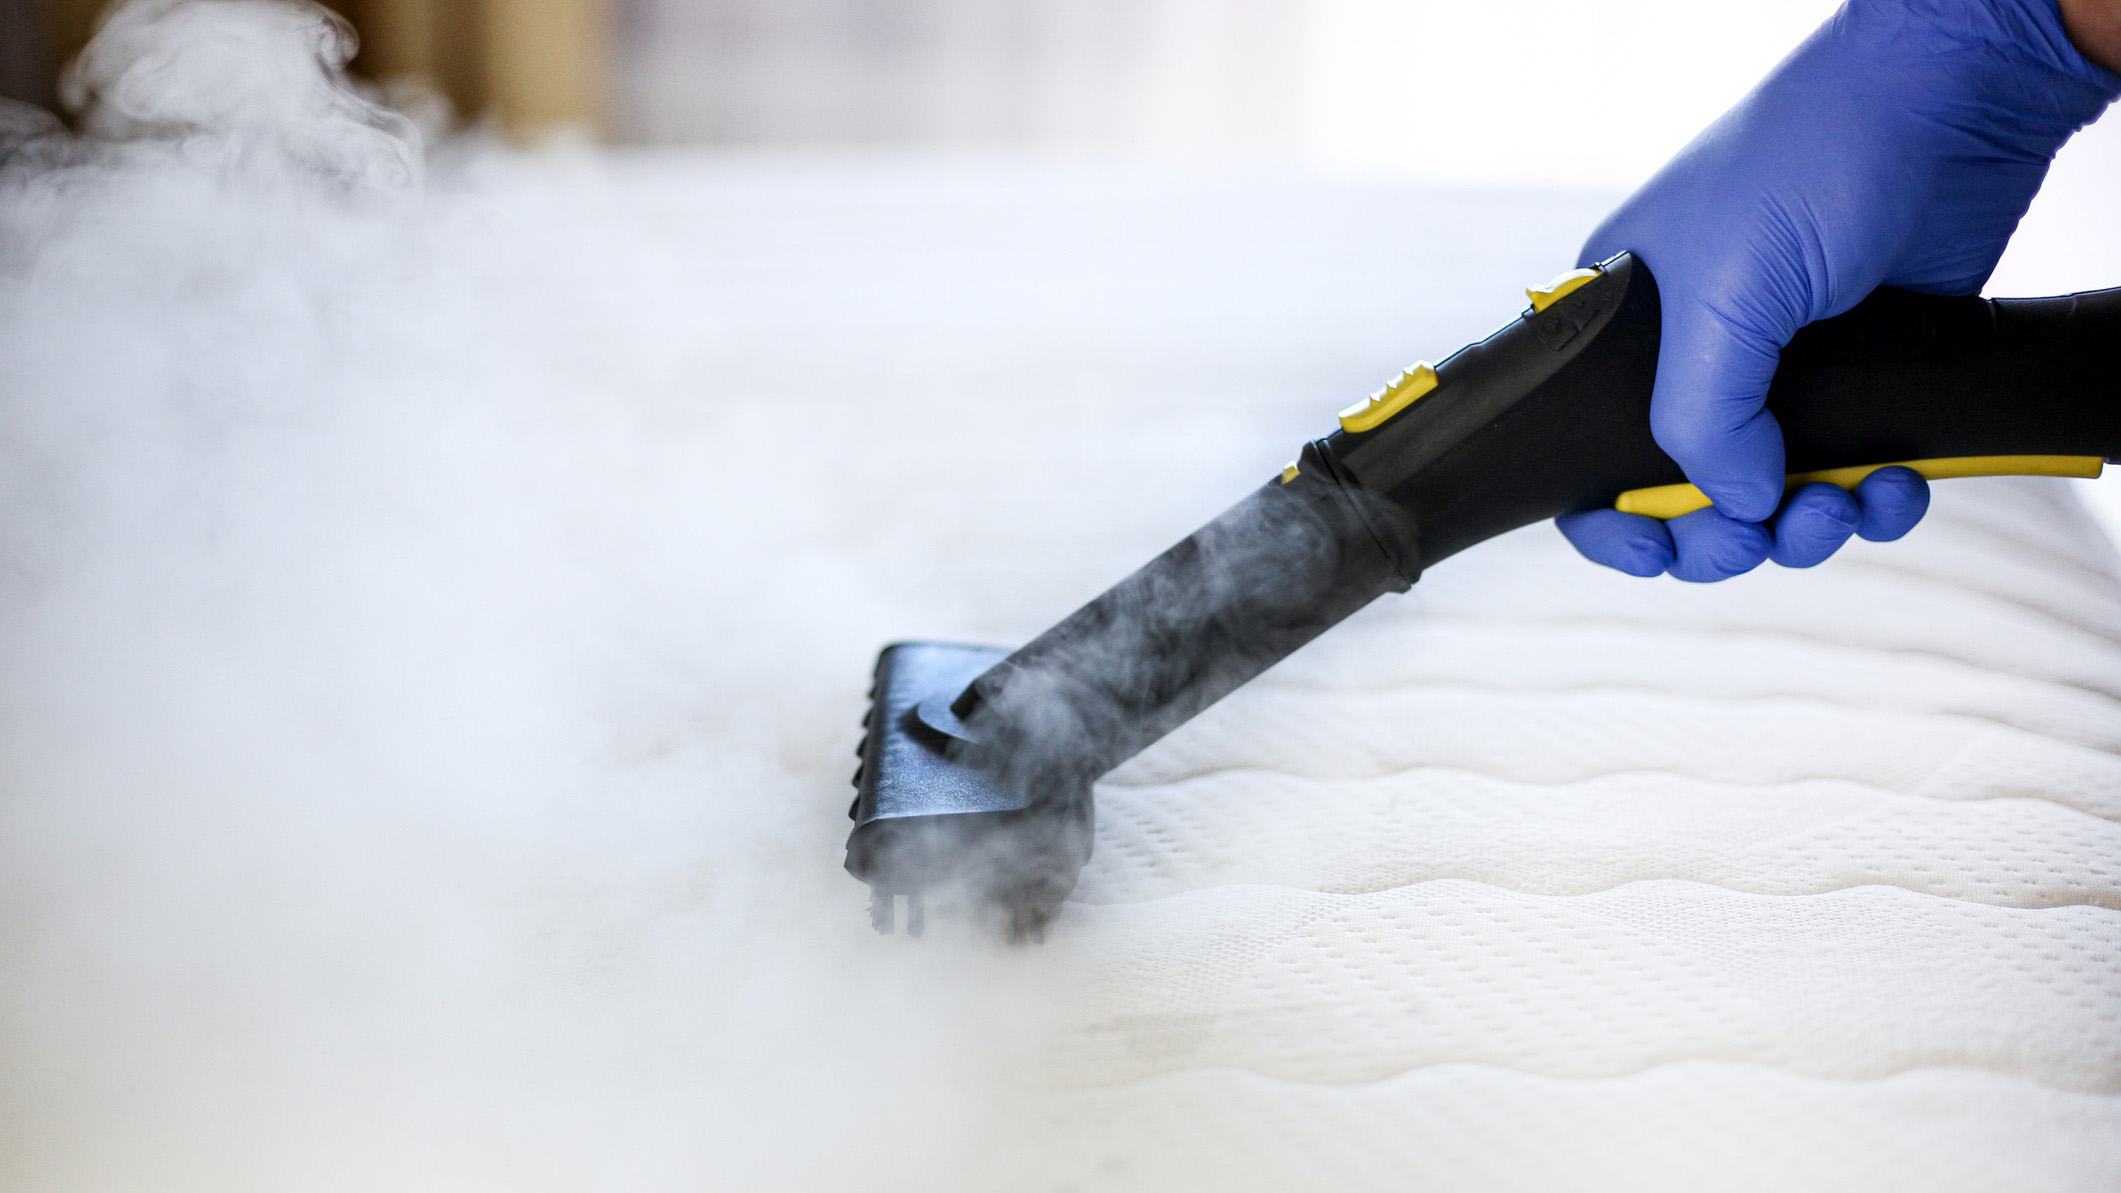 how to, how to steam clean a mattress to get rid of dust mites, bed bugs and more